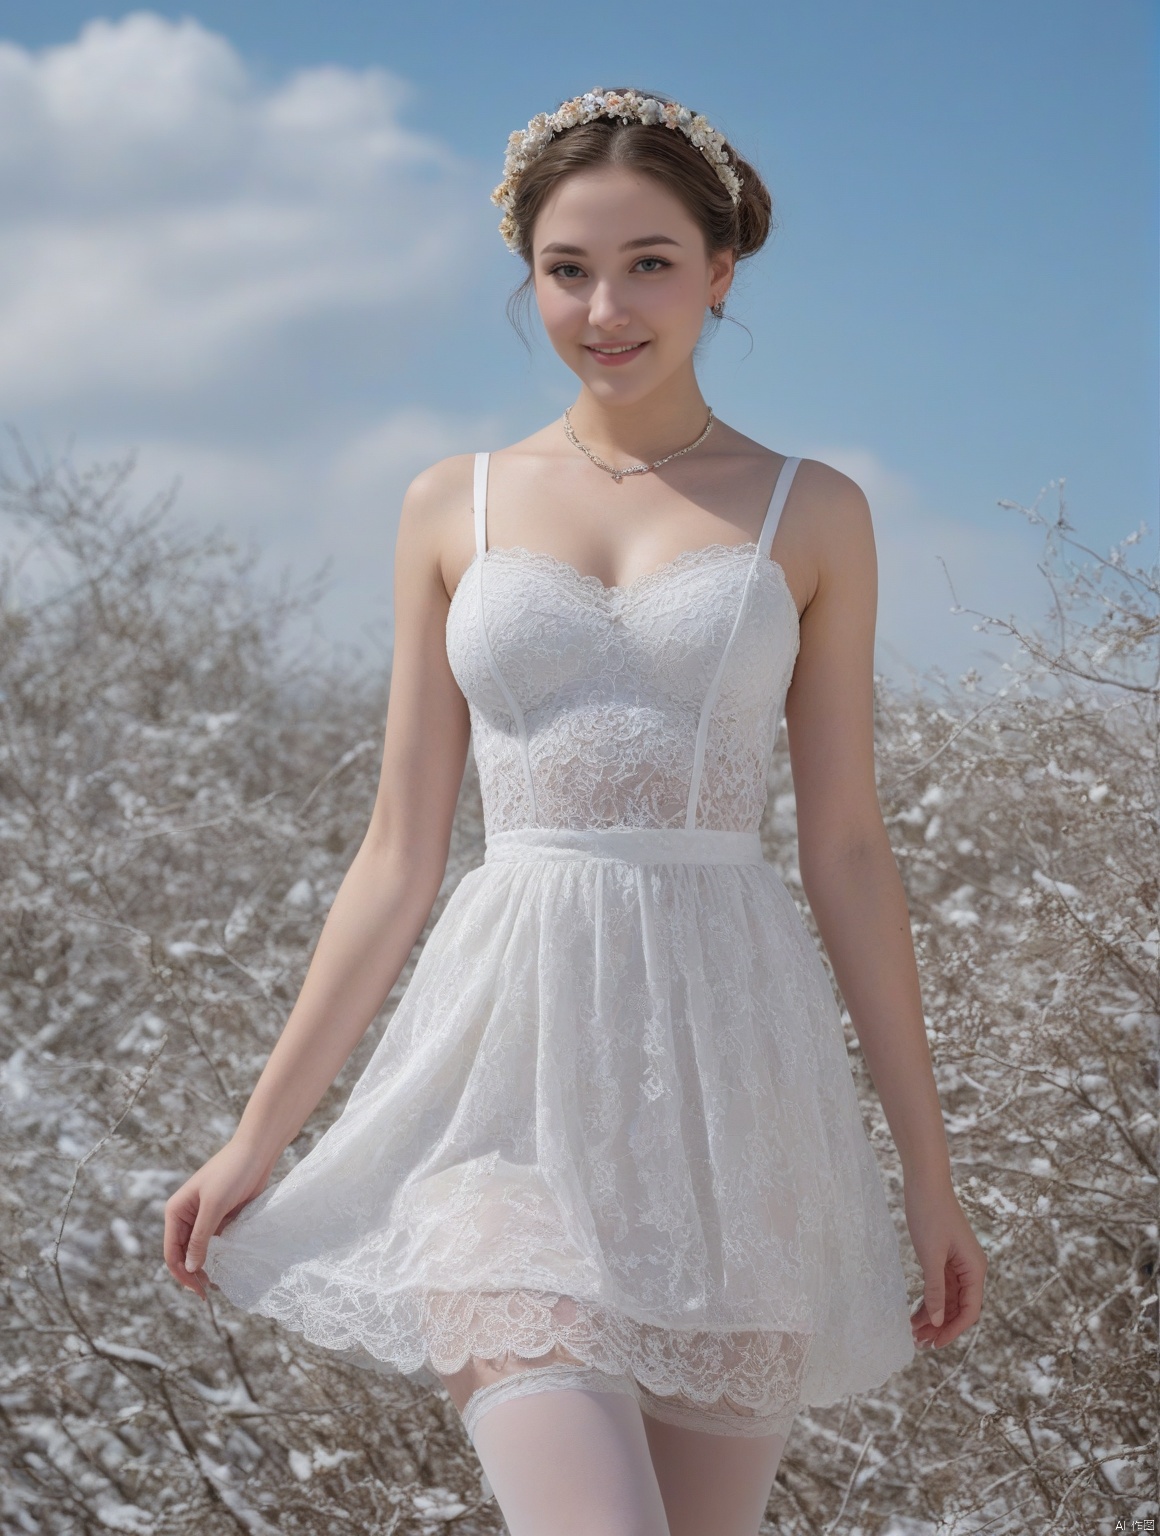  (((full body))), Realistic, masterpiece, highest quality, high resolution, extreme details, 1 girl, solo, bun, headdress, delicate eyes, beautiful face, shallow smile, delicate necklace, suspender dress, white lace dress, light gauze, snow-white skin, delicate skin texture, silver bracelet, pantyhose, high heels, elegant standing, outdoor, blue sky, white clouds, flowers, flowers, grass, movie light, light, light tracking, (Nikon AF-S 105mm f / 1.4E ED), MAJICMIX STYLE